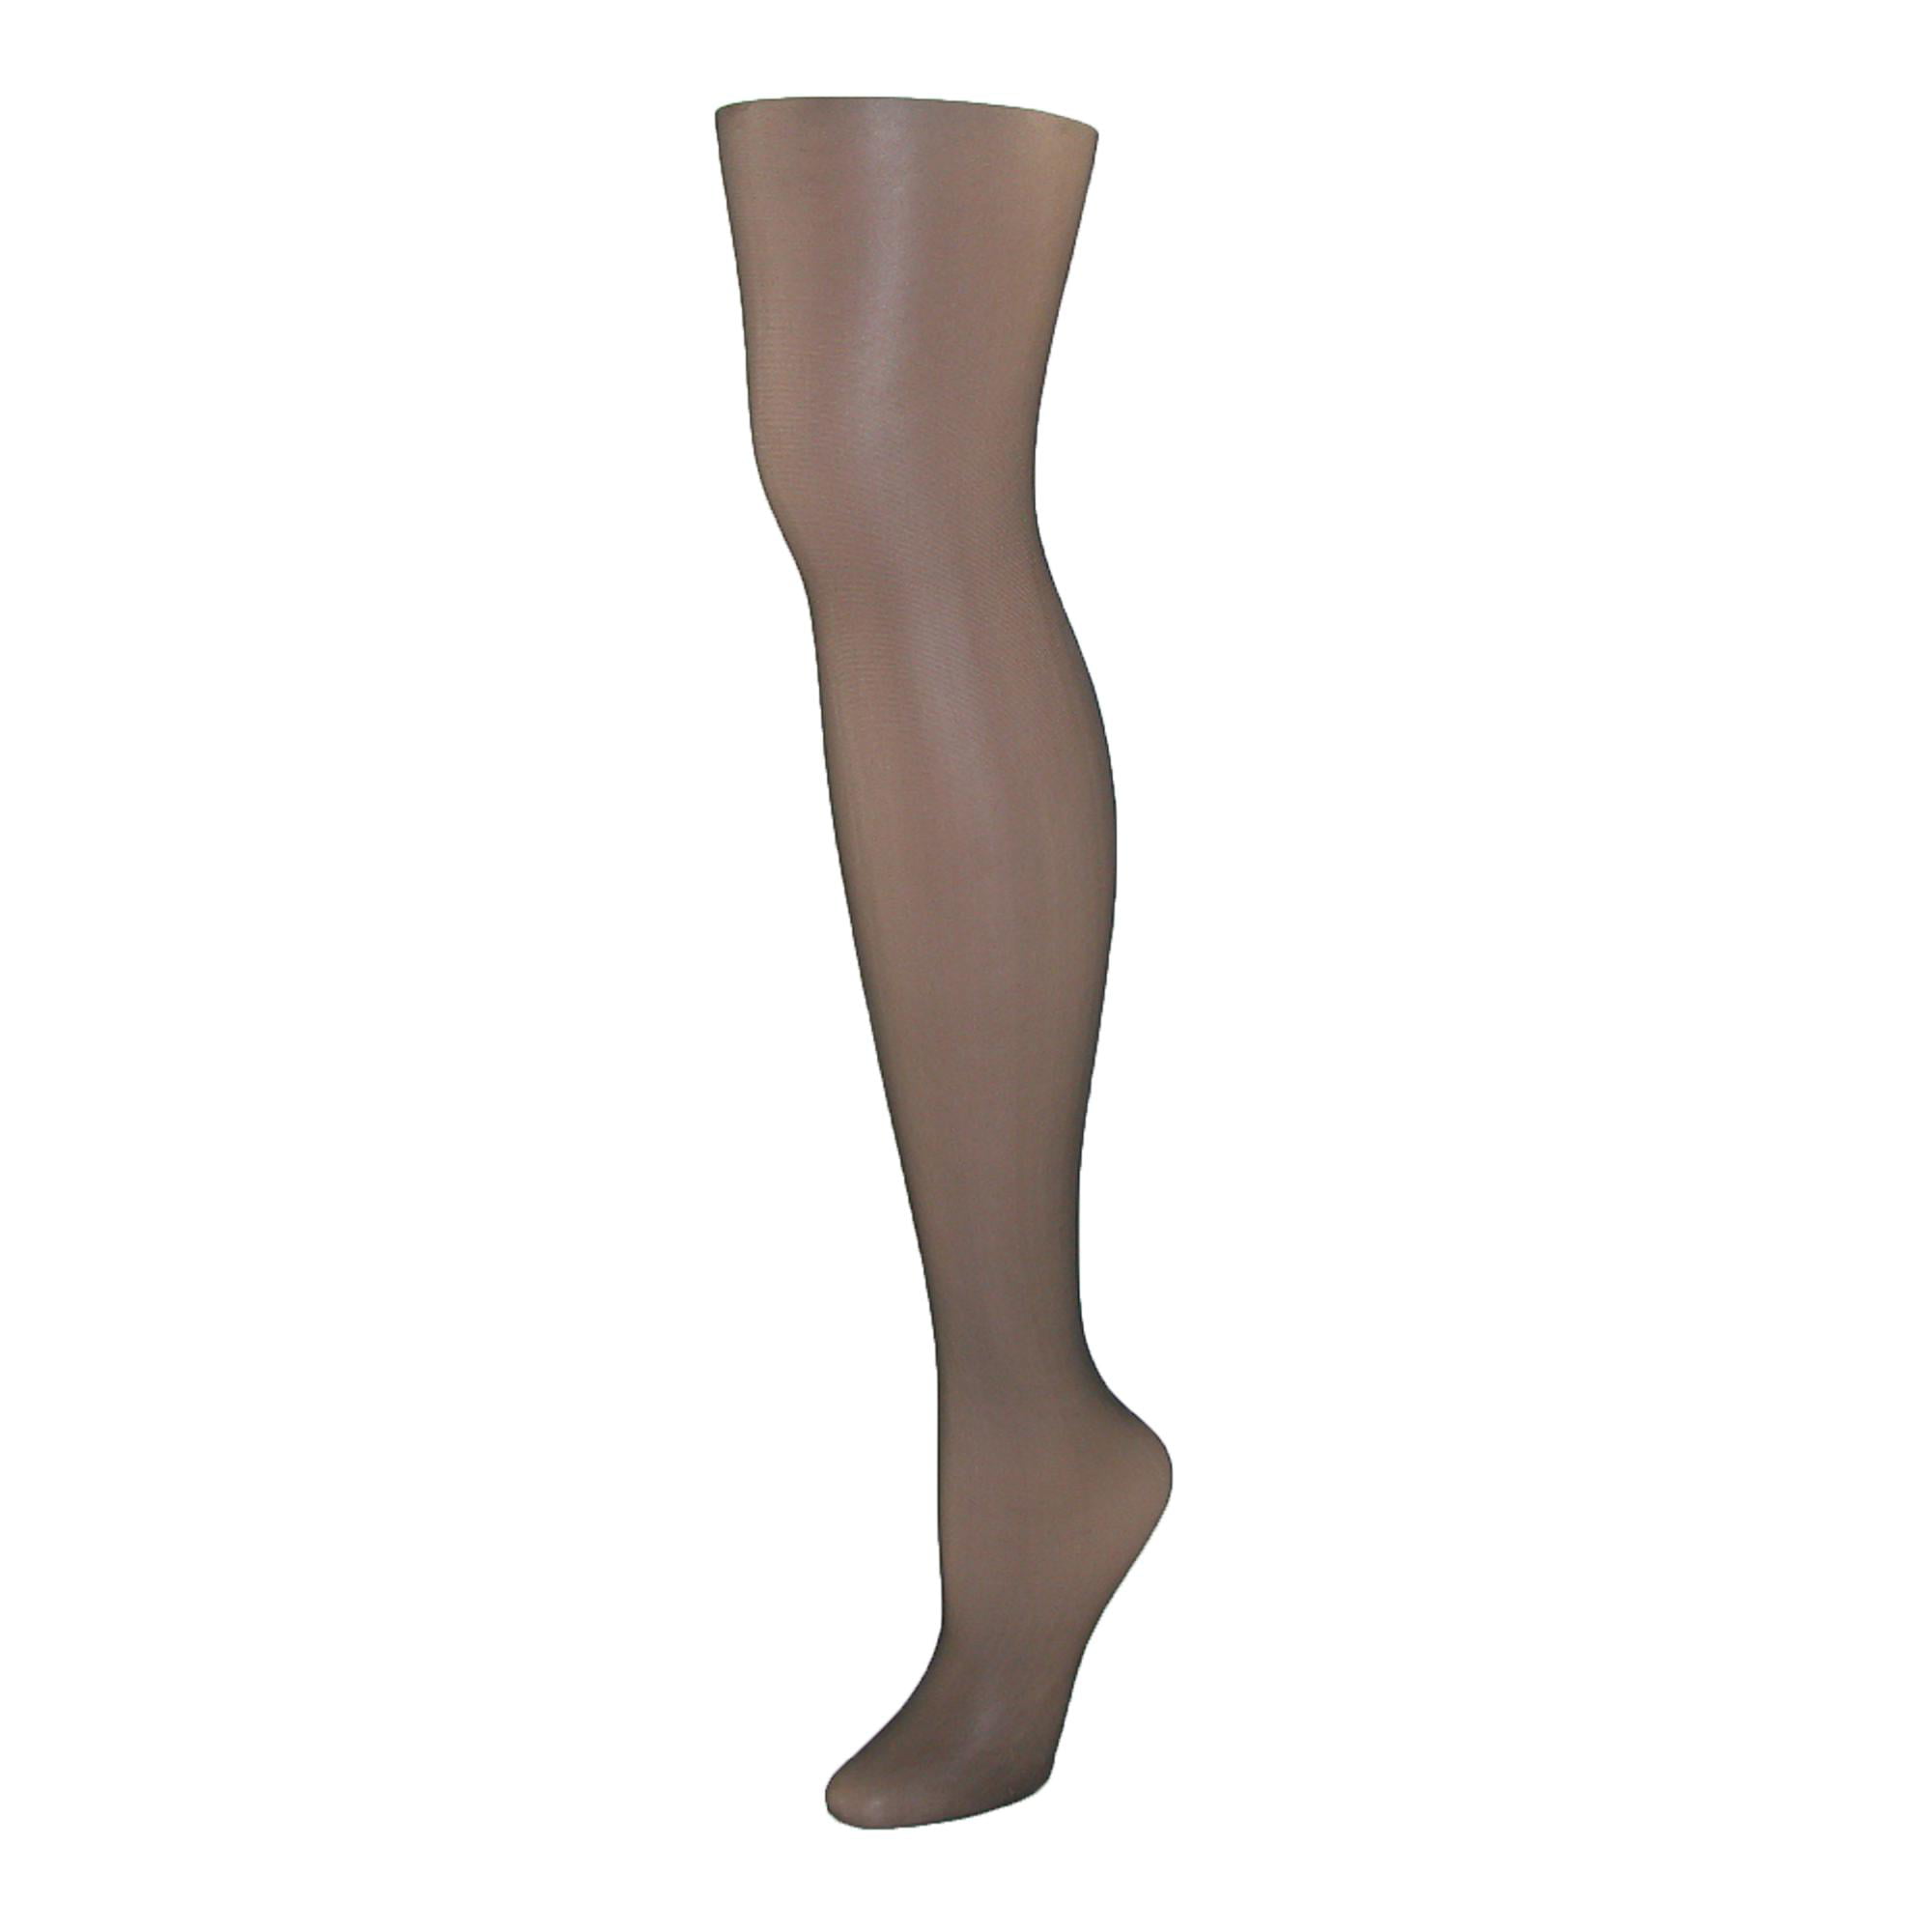 Hanes Womens Control Top Pantyhose 6-Pack